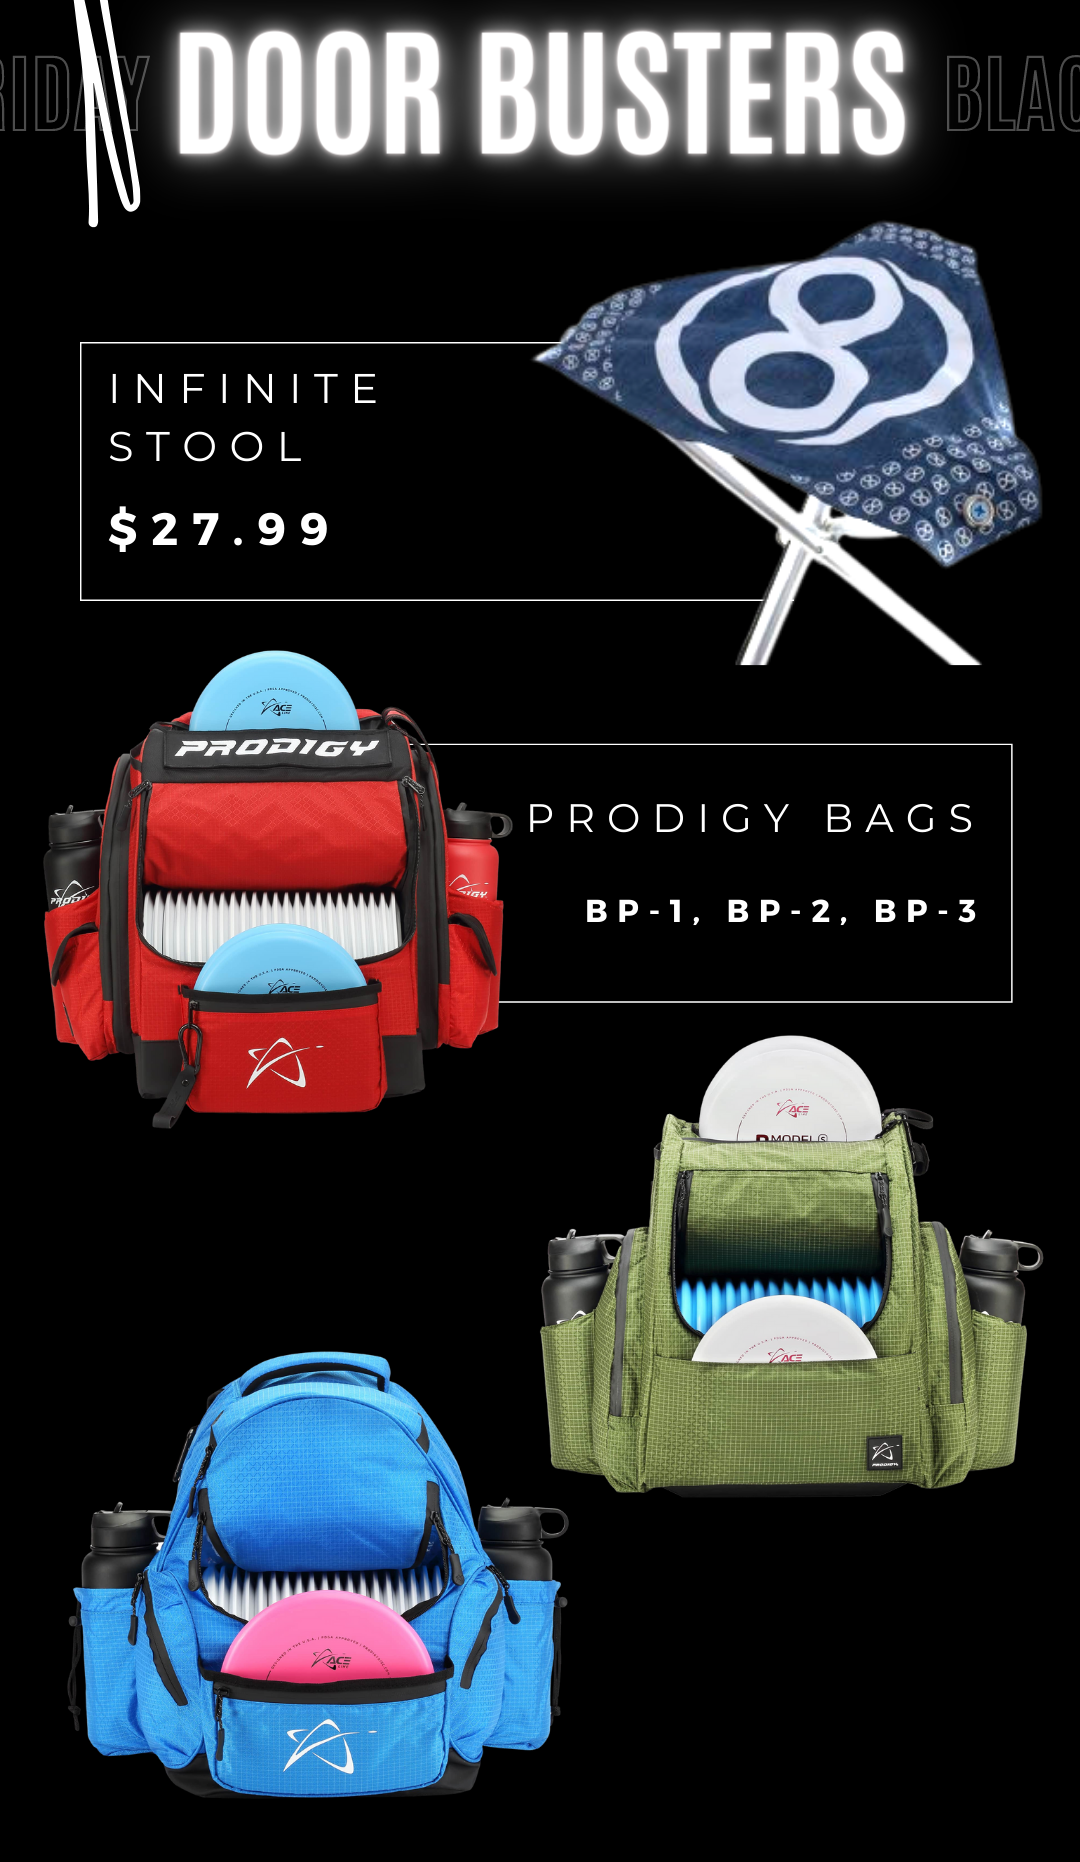 Disc golf stools and tournament backpacks on sale